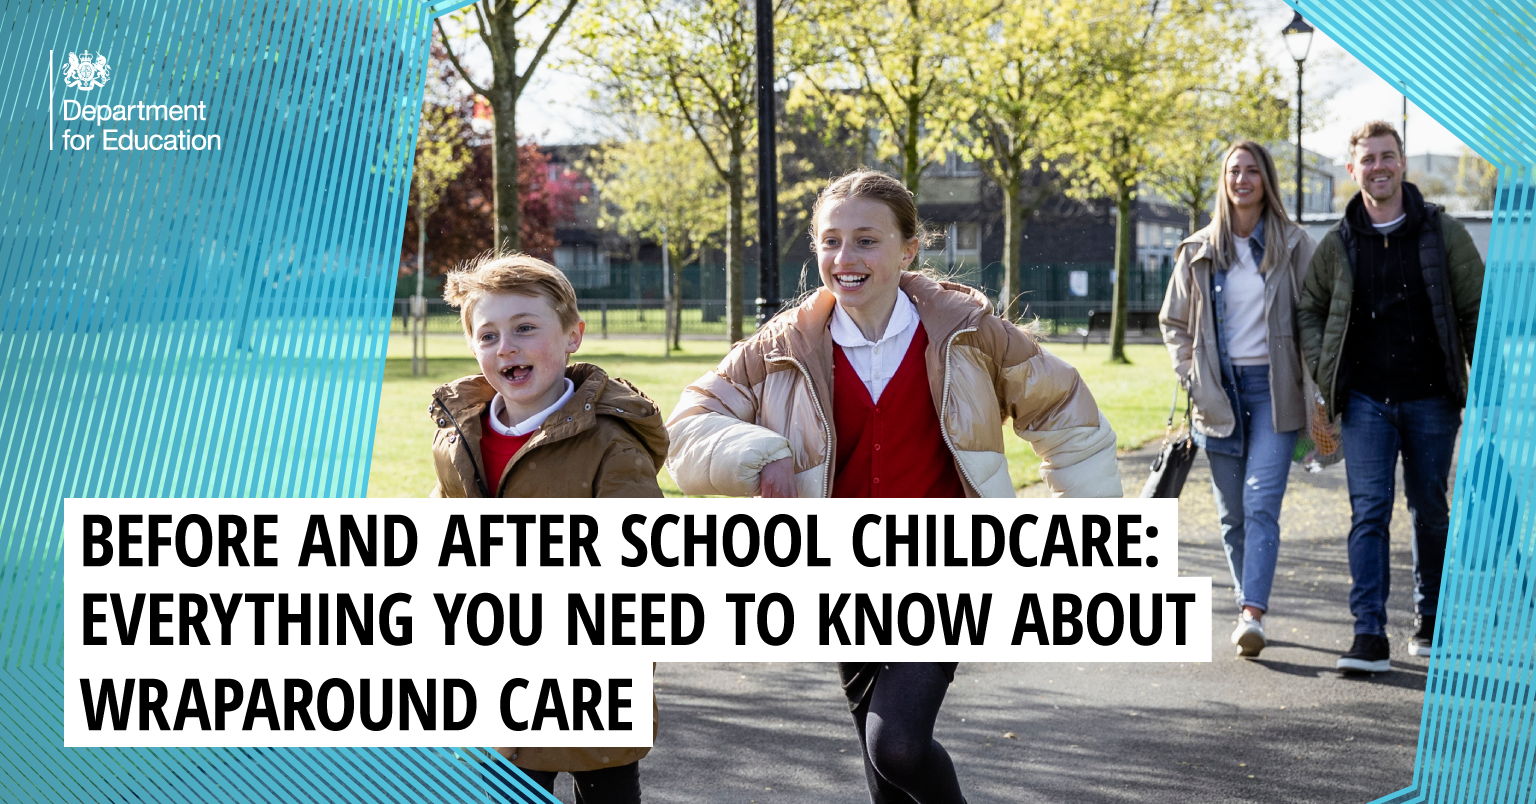 Before and after school childcare: Everything you need to know about wraparound care